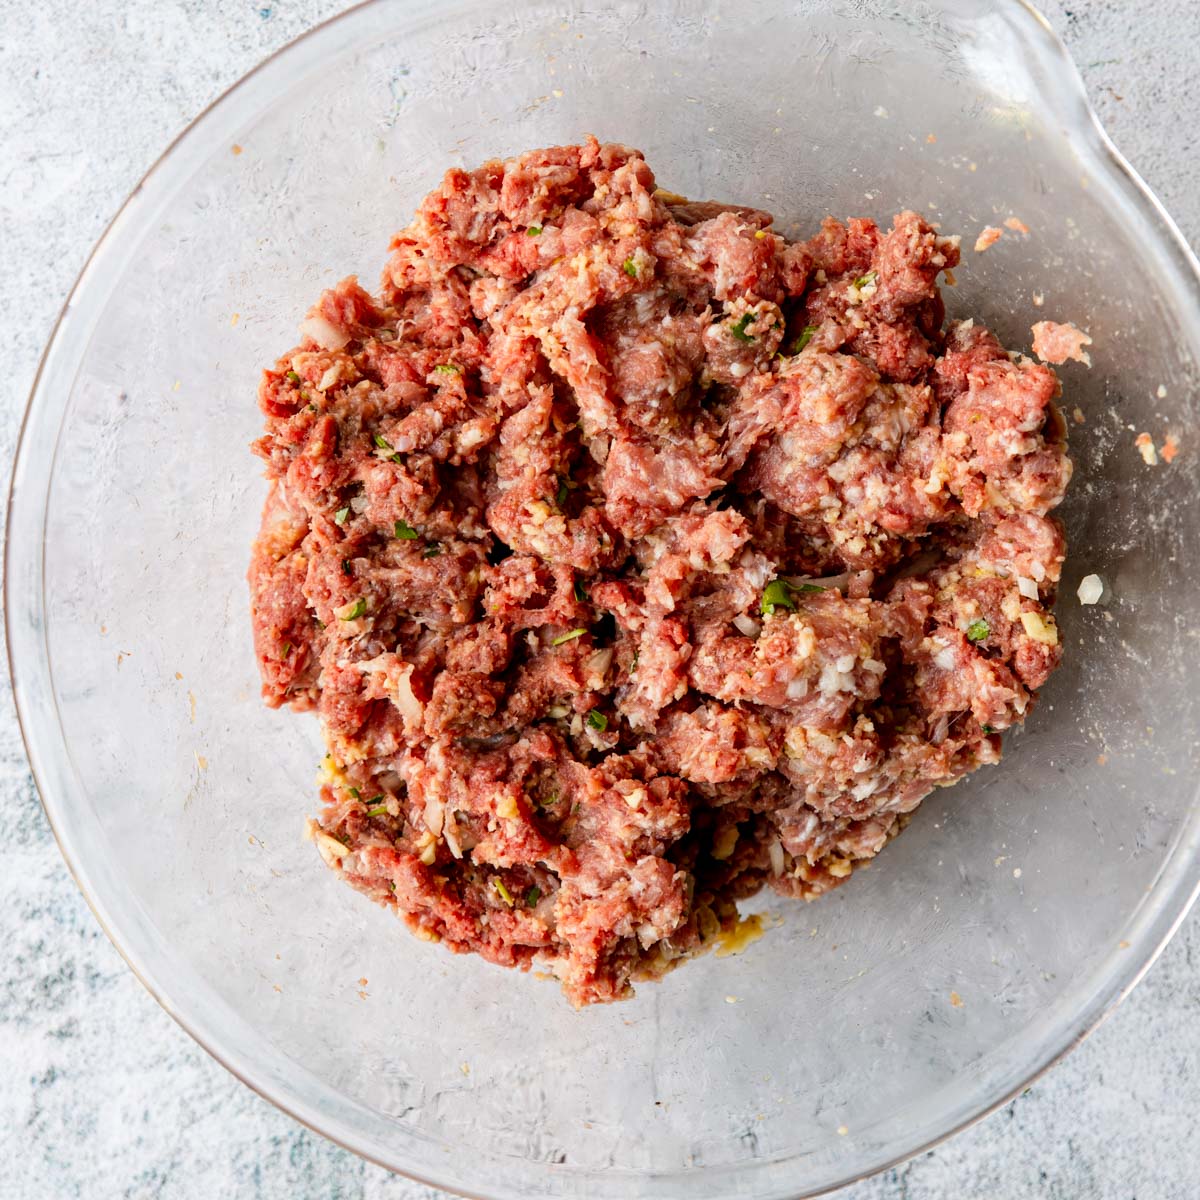 swedish meatball mixture with ground pork and ground beef